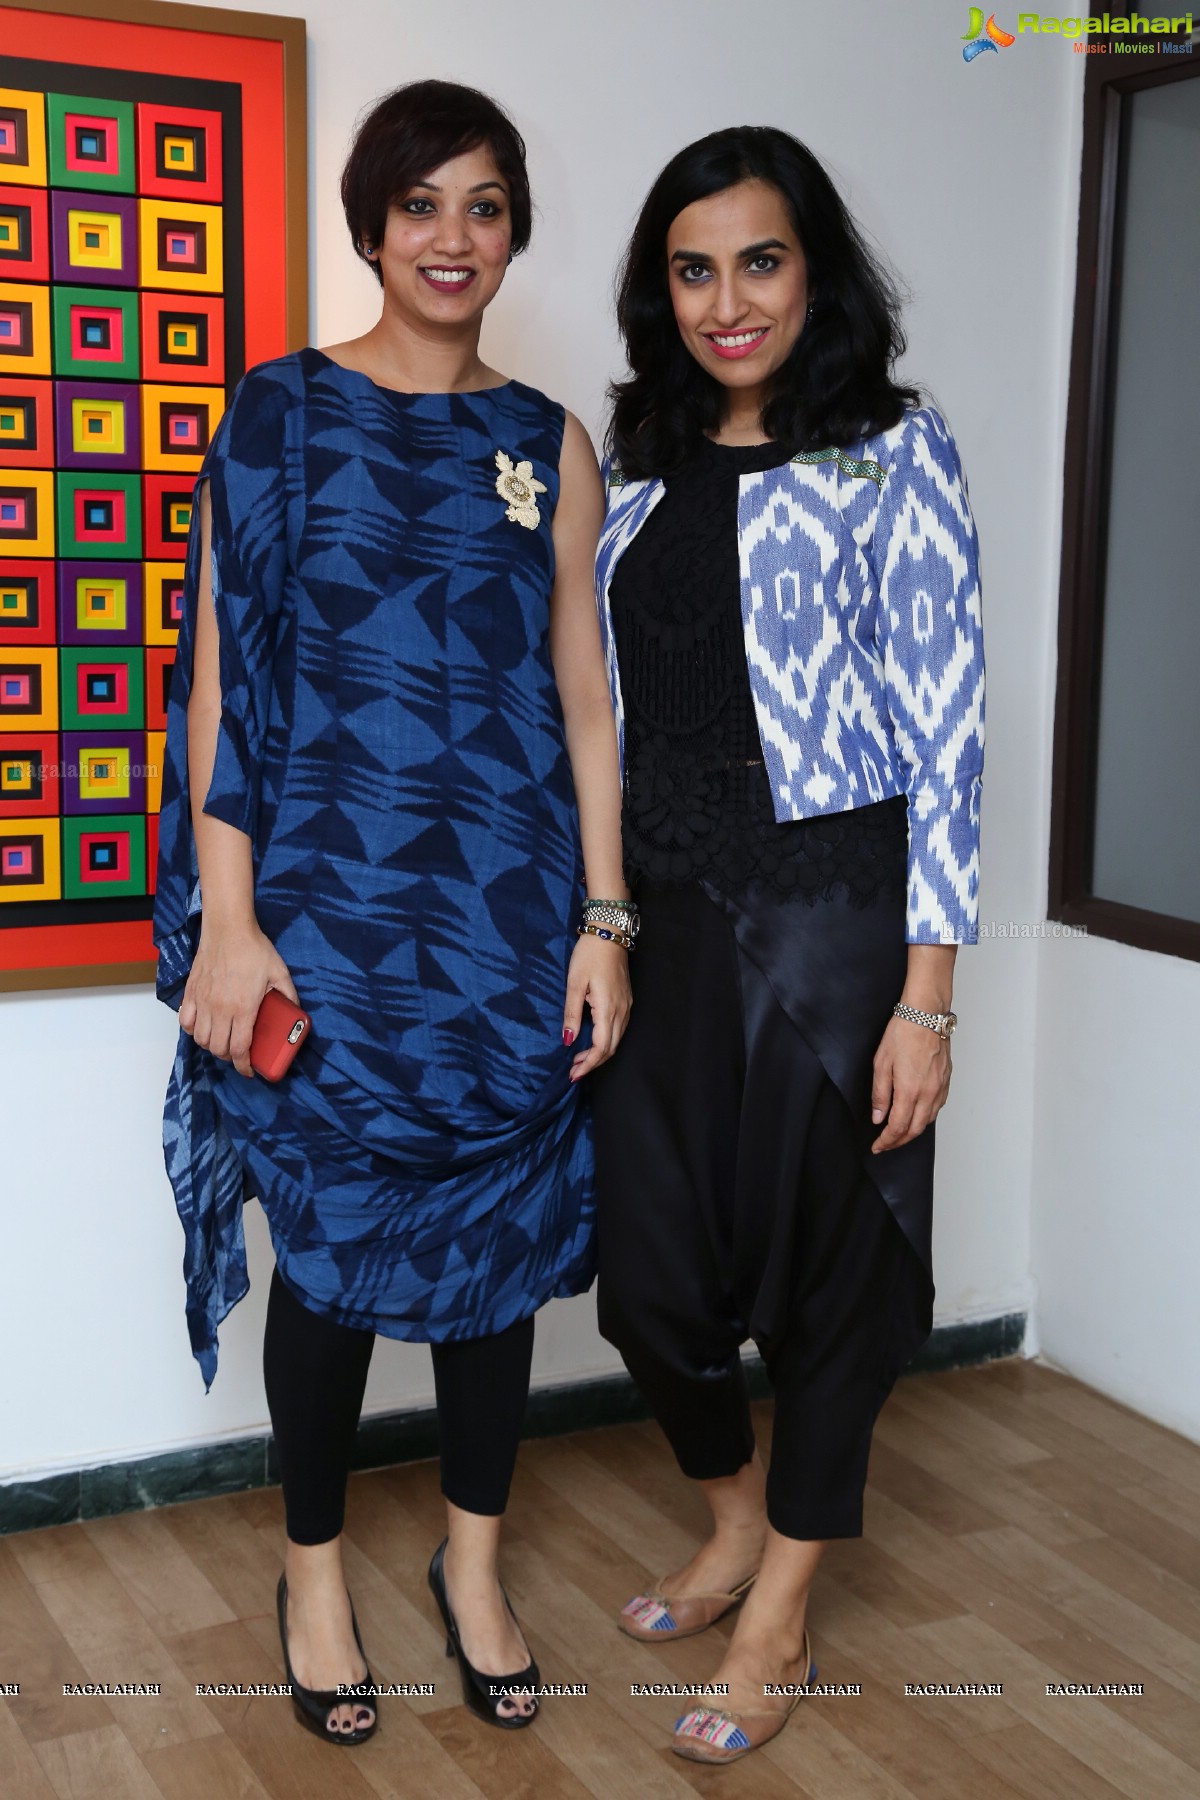 Memory Weave of Pixels and Patterns at Shrishti Art Gallery, Jubilee Hills, Hyderabad